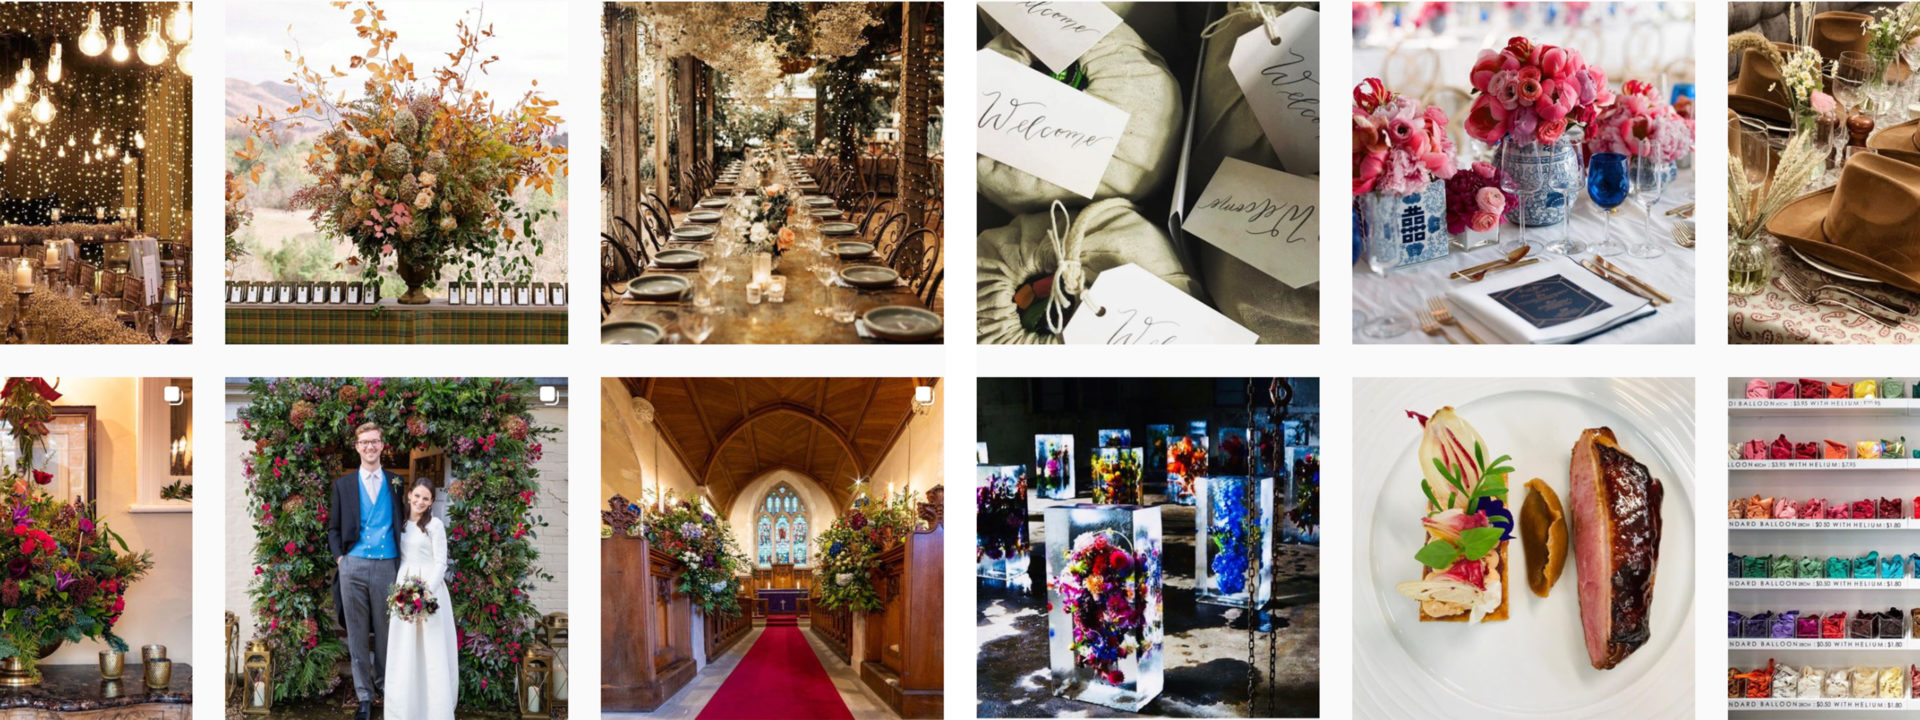 Instagram account with event planning inspiration images, like event venues, decor and catering